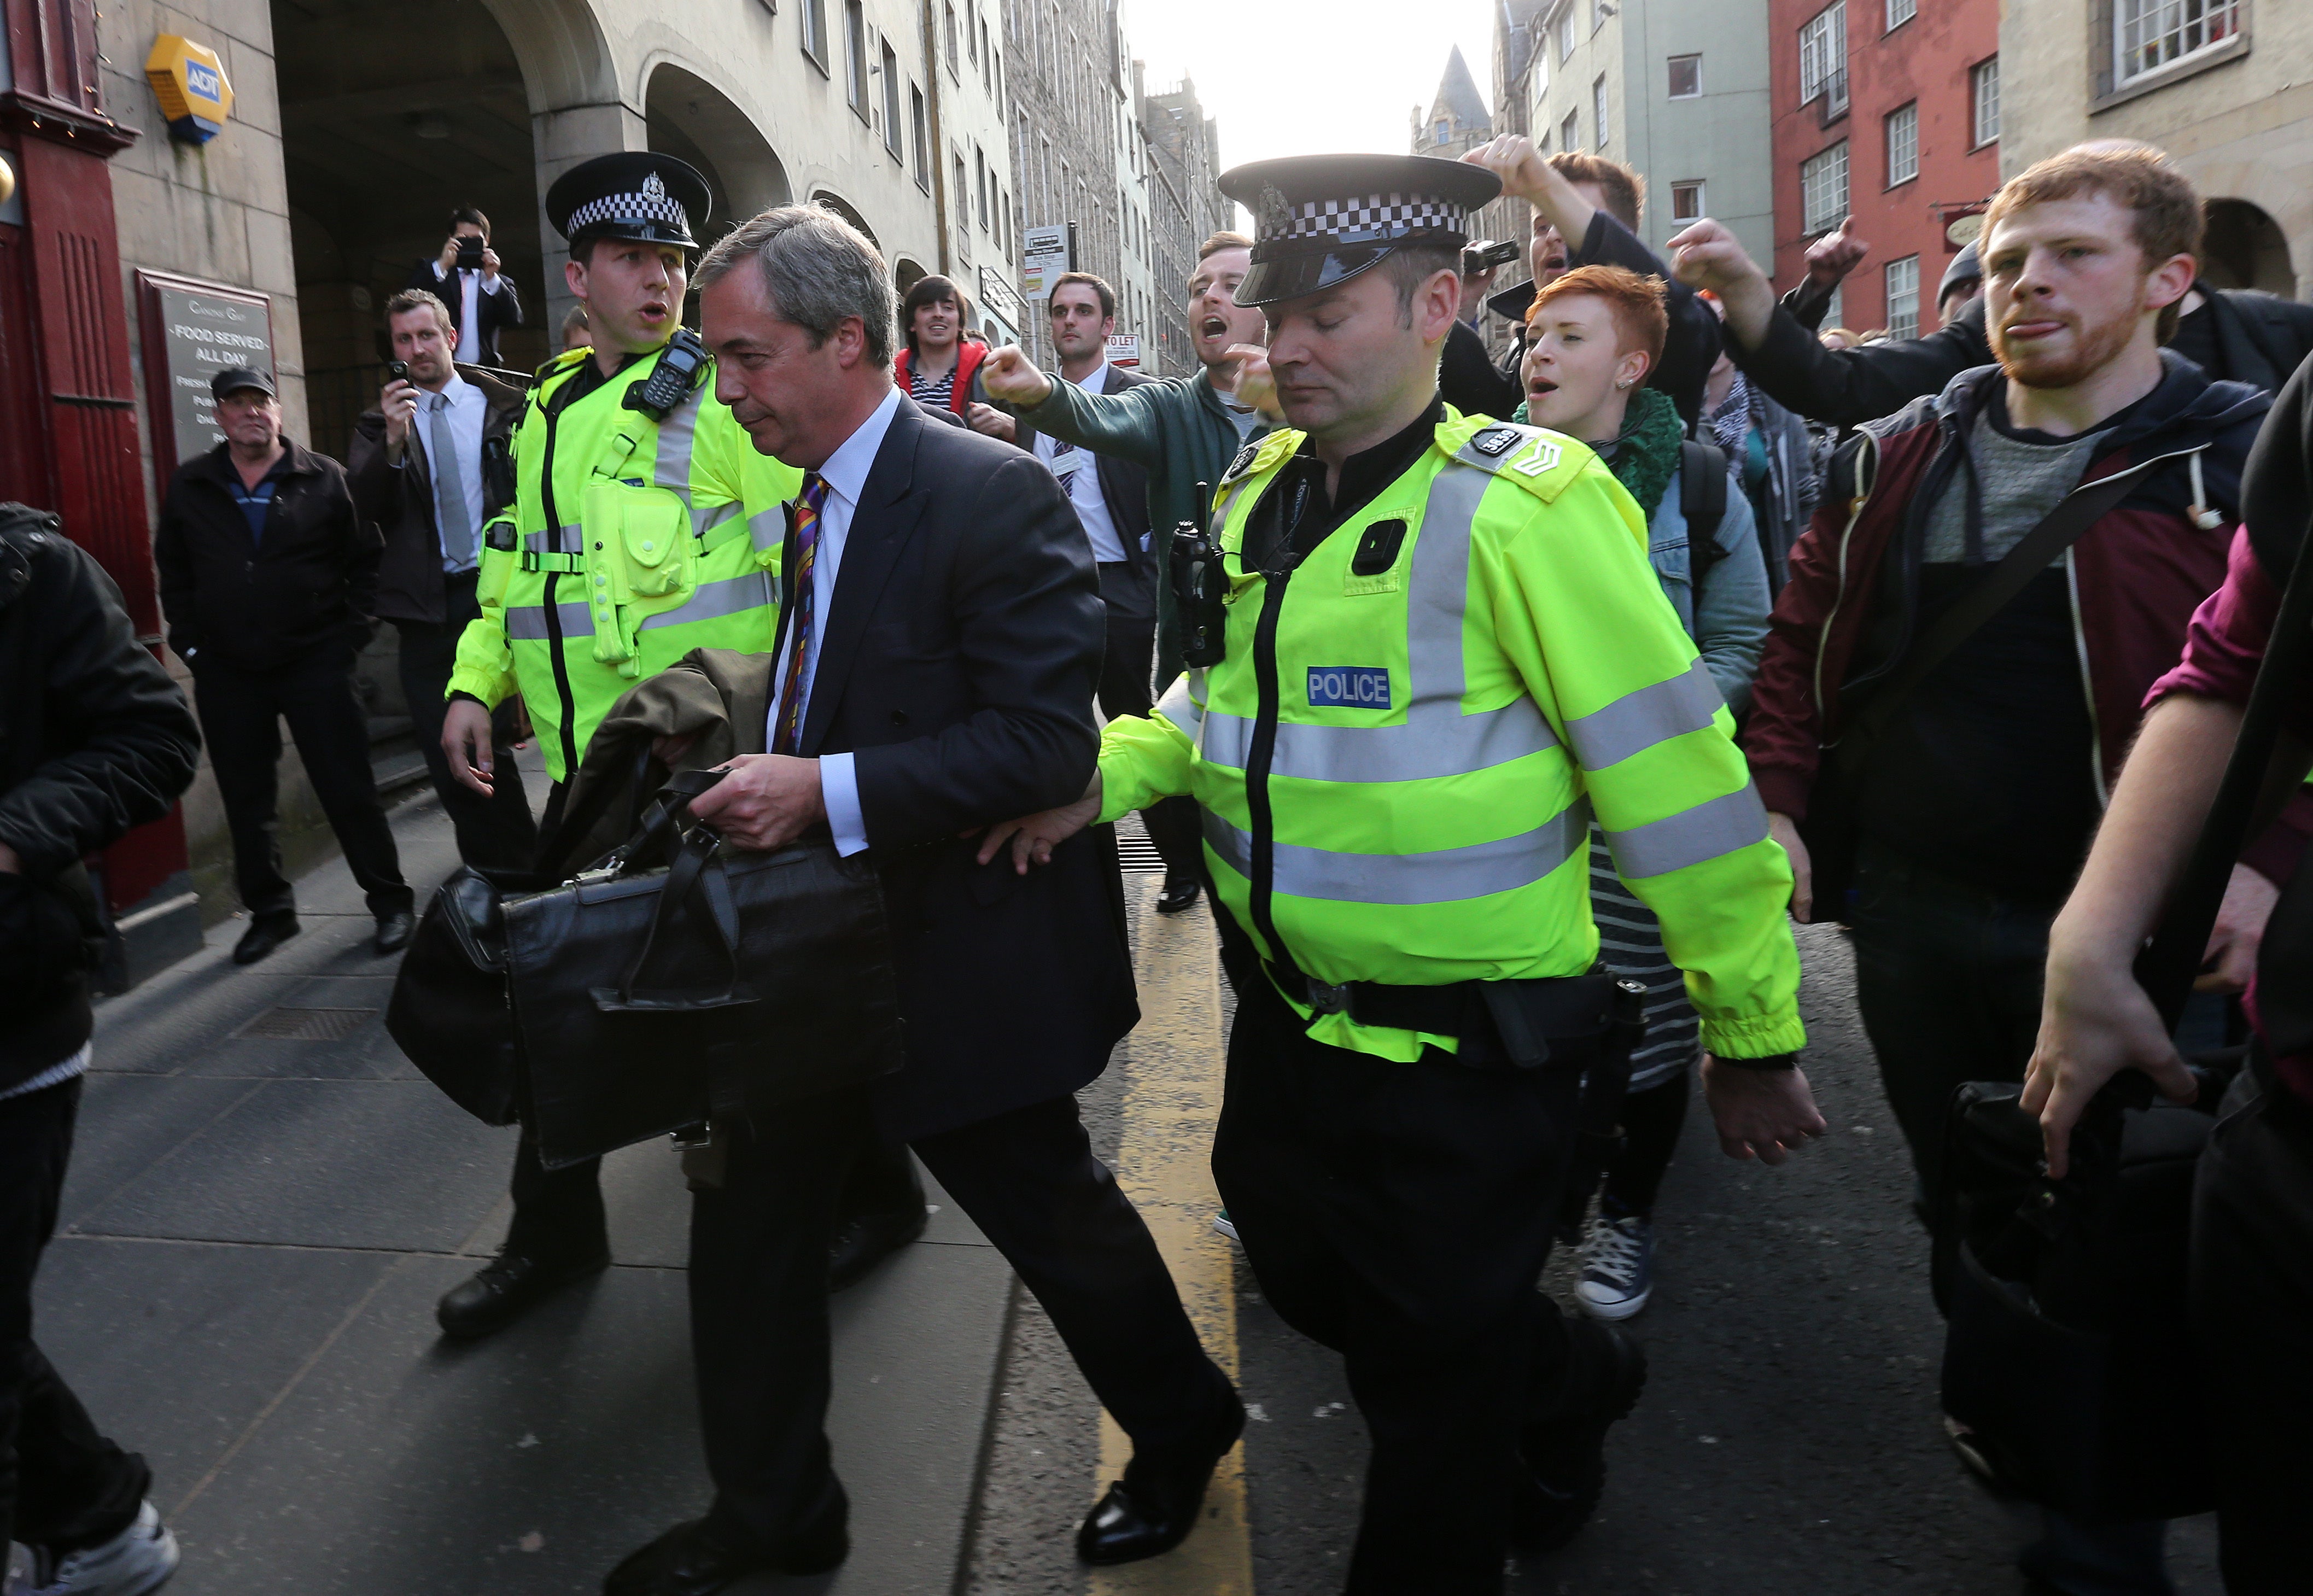 The then Ukip leader Nigel Farage had to be taken away in a police riot van after protestors gathered at a pub in Edinburgh where he hosted a press conference in 2013. (Andrew Milligan/PA)